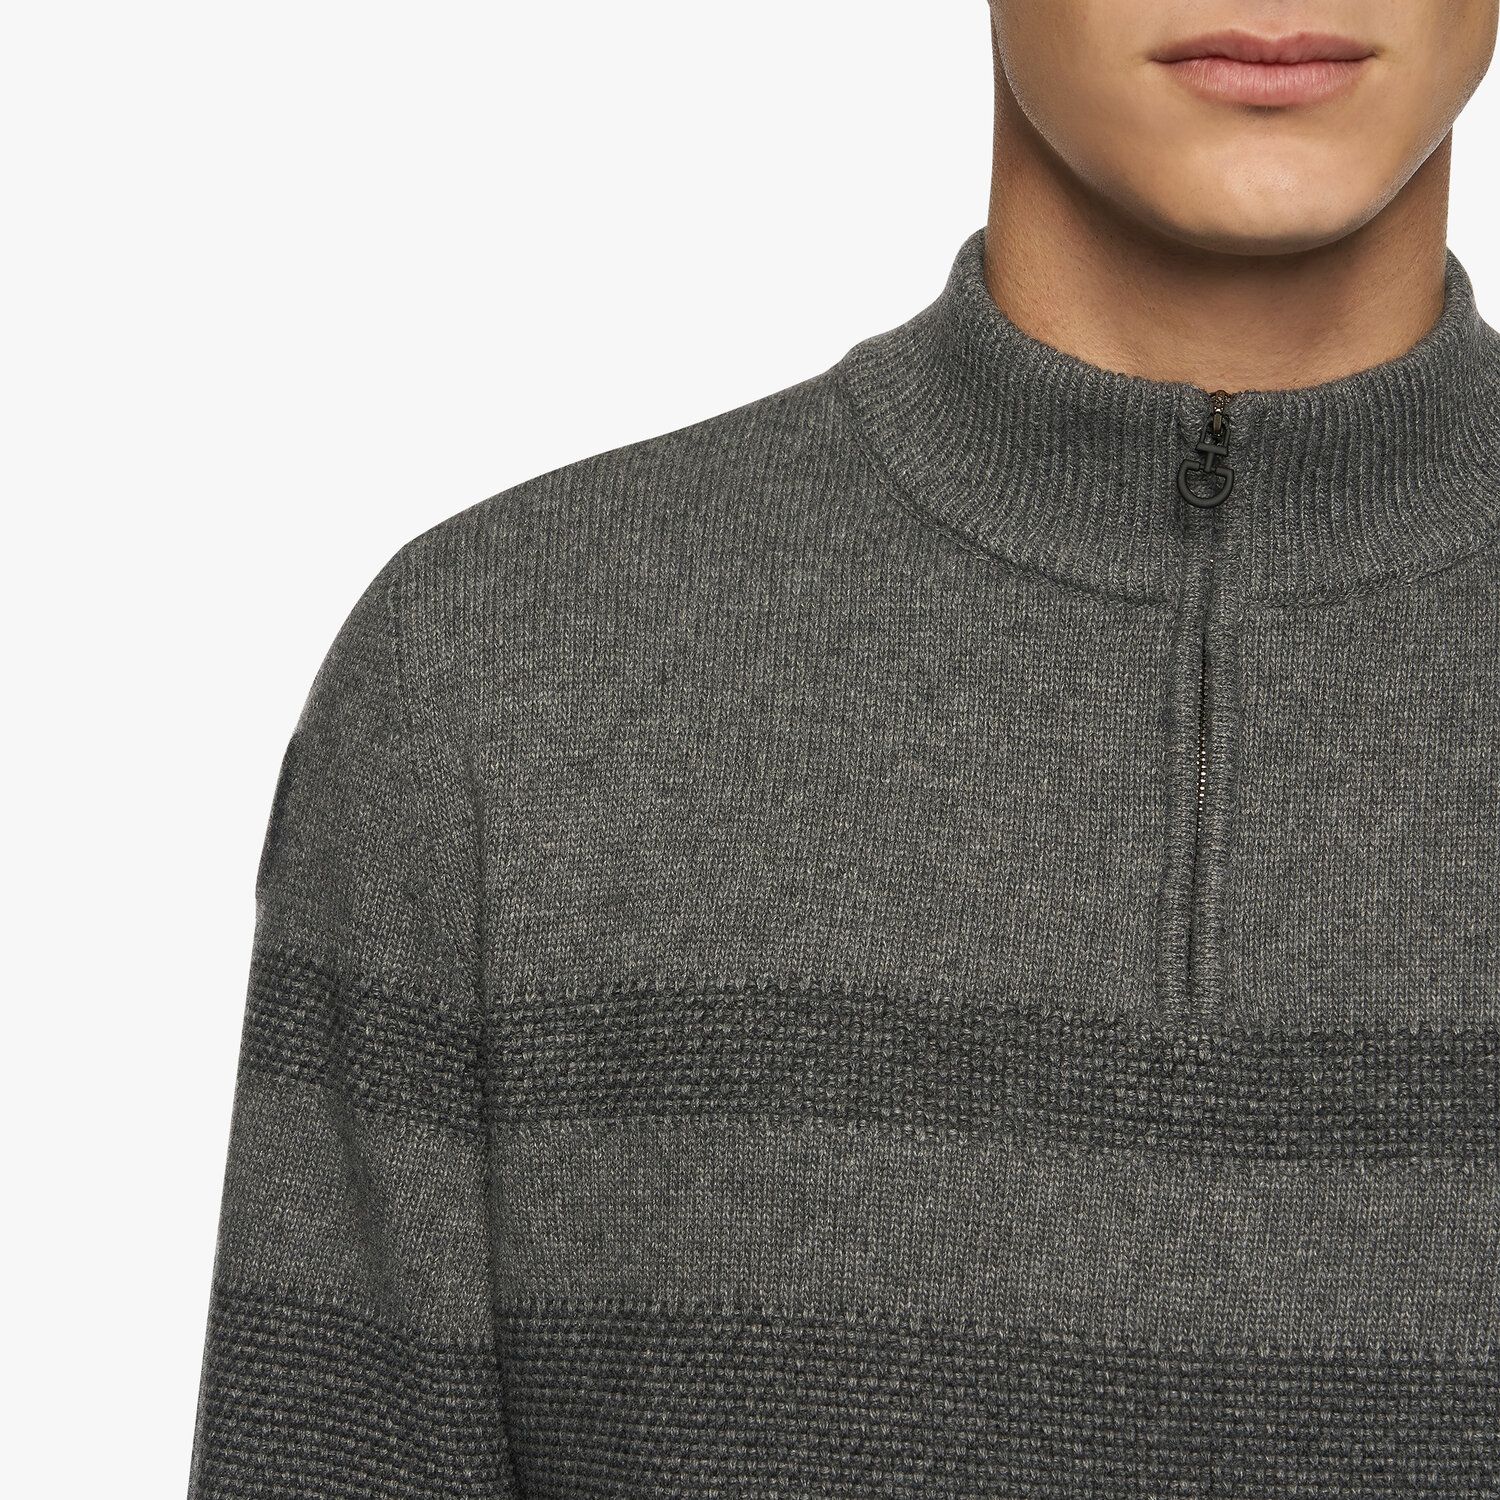 Cavalleria Toscana Men’s wool jumper with a high neck and zip CHARCOAL GREY-5